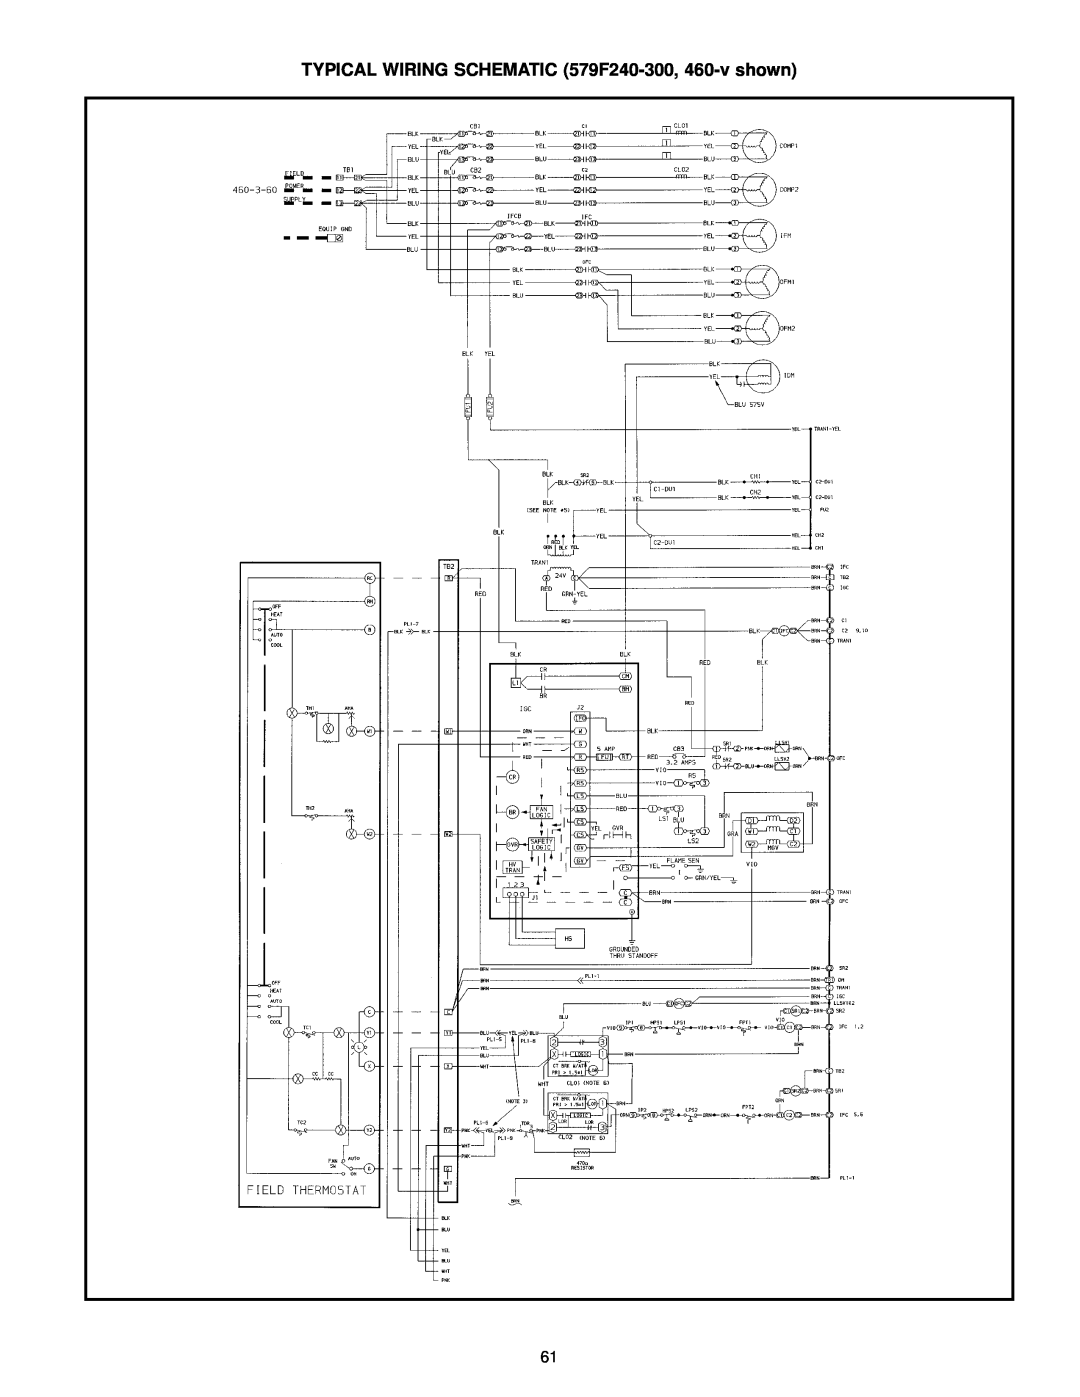 Bryant 580D manual TYPICAL WIRING SCHEMATIC 579F240-300, 460-vshown 